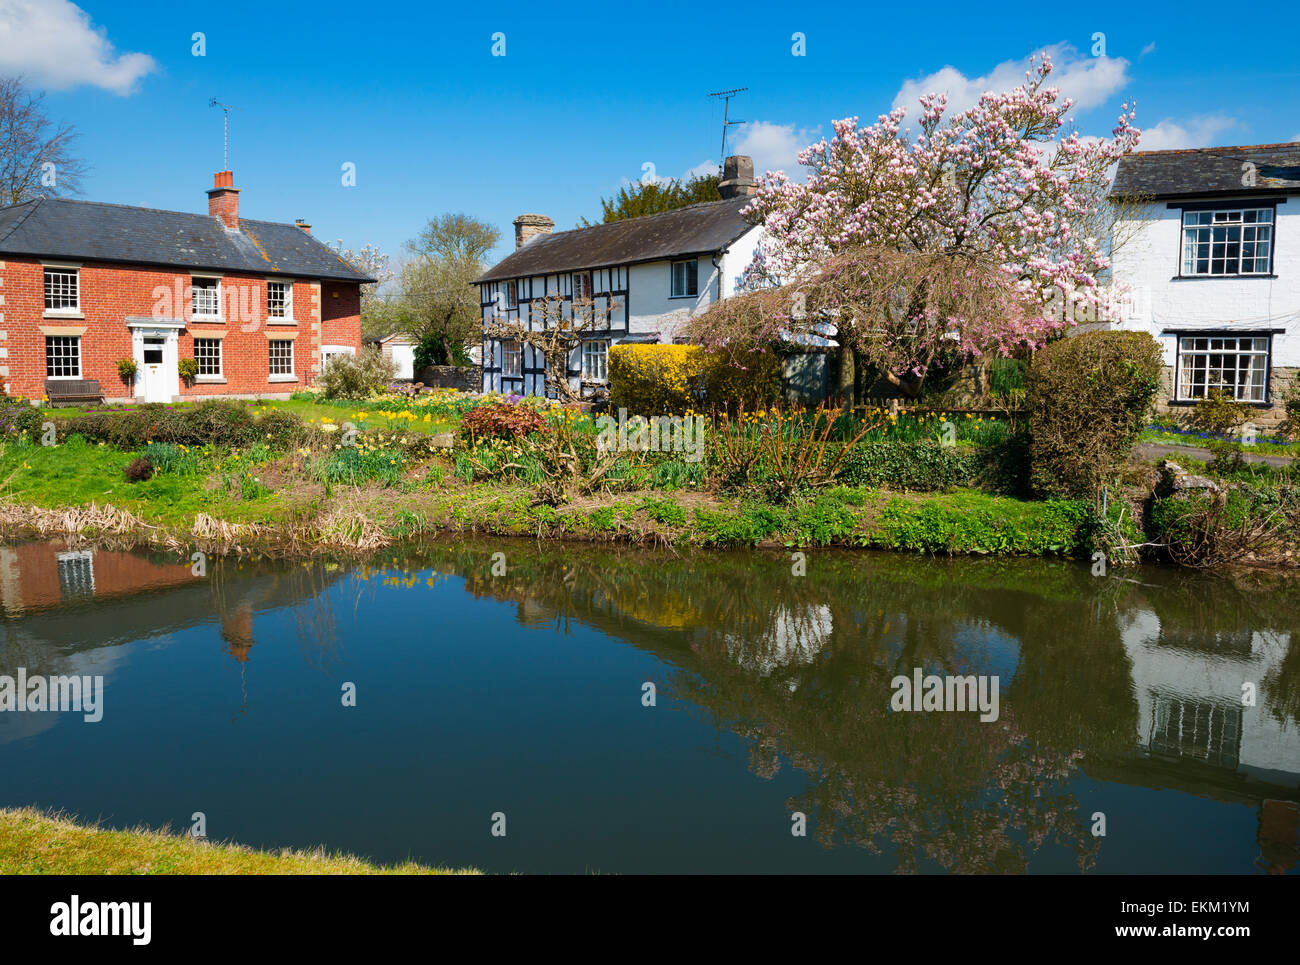 Spring colour in the village of Eardisland, Herefordshire, England. Stock Photo